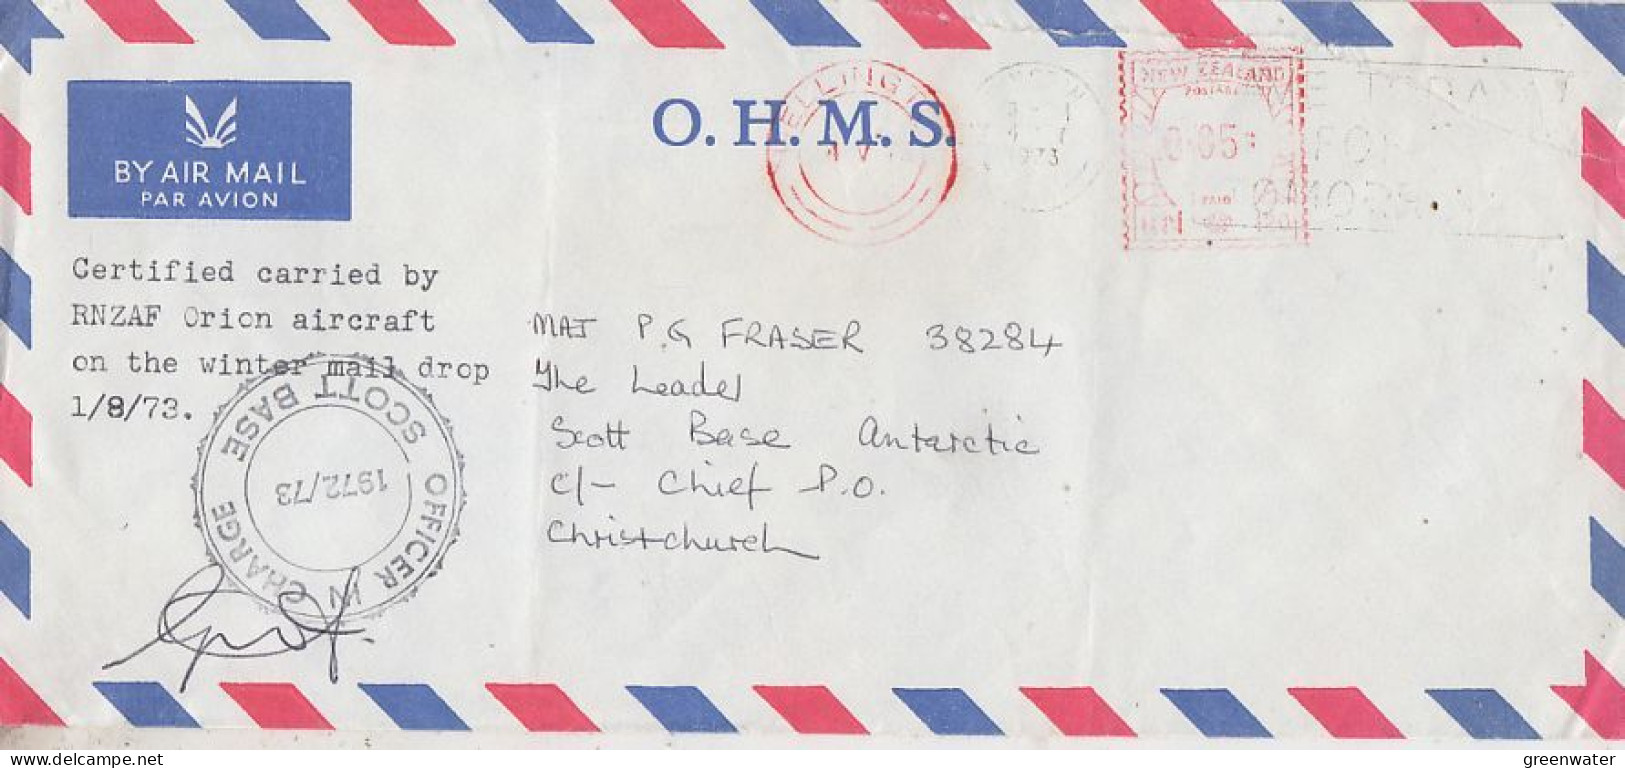 Ross Dependency Scott Base  O.H.M.S. RNZAF Orion Aircraf Winter Mail Drop 1 AUG 1973 Signature (RO196) - Covers & Documents